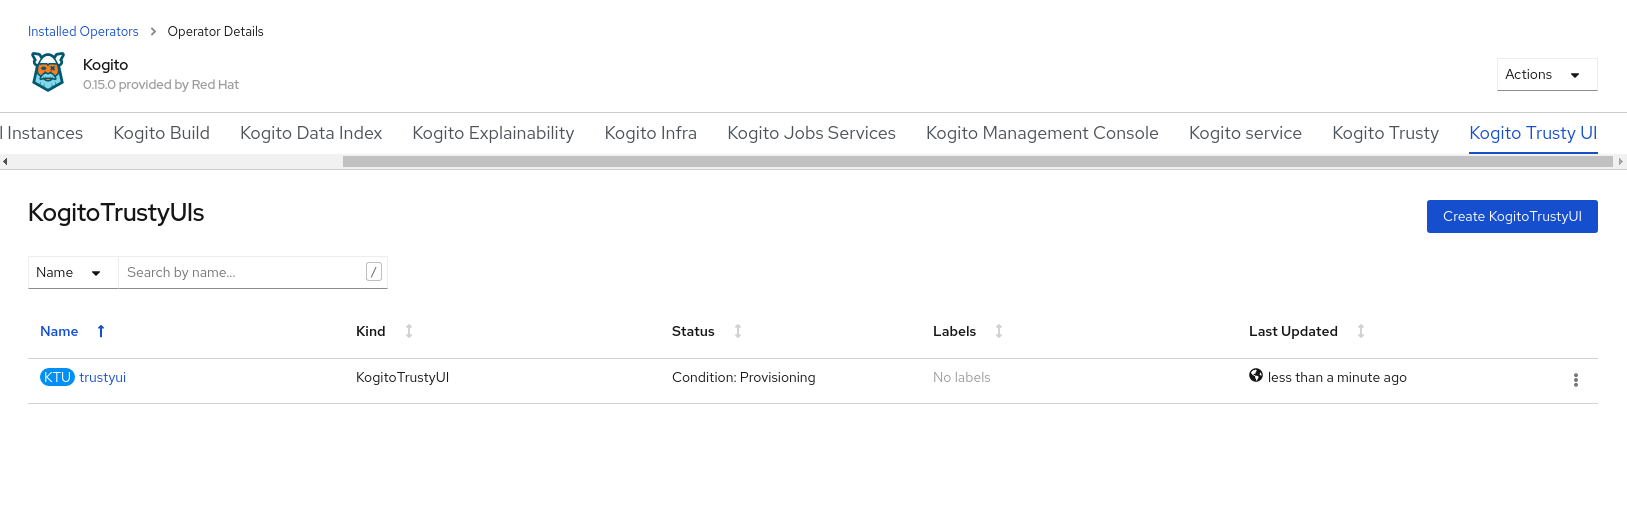 Image of Kogito Audit Investigation Console instance on OpenShift